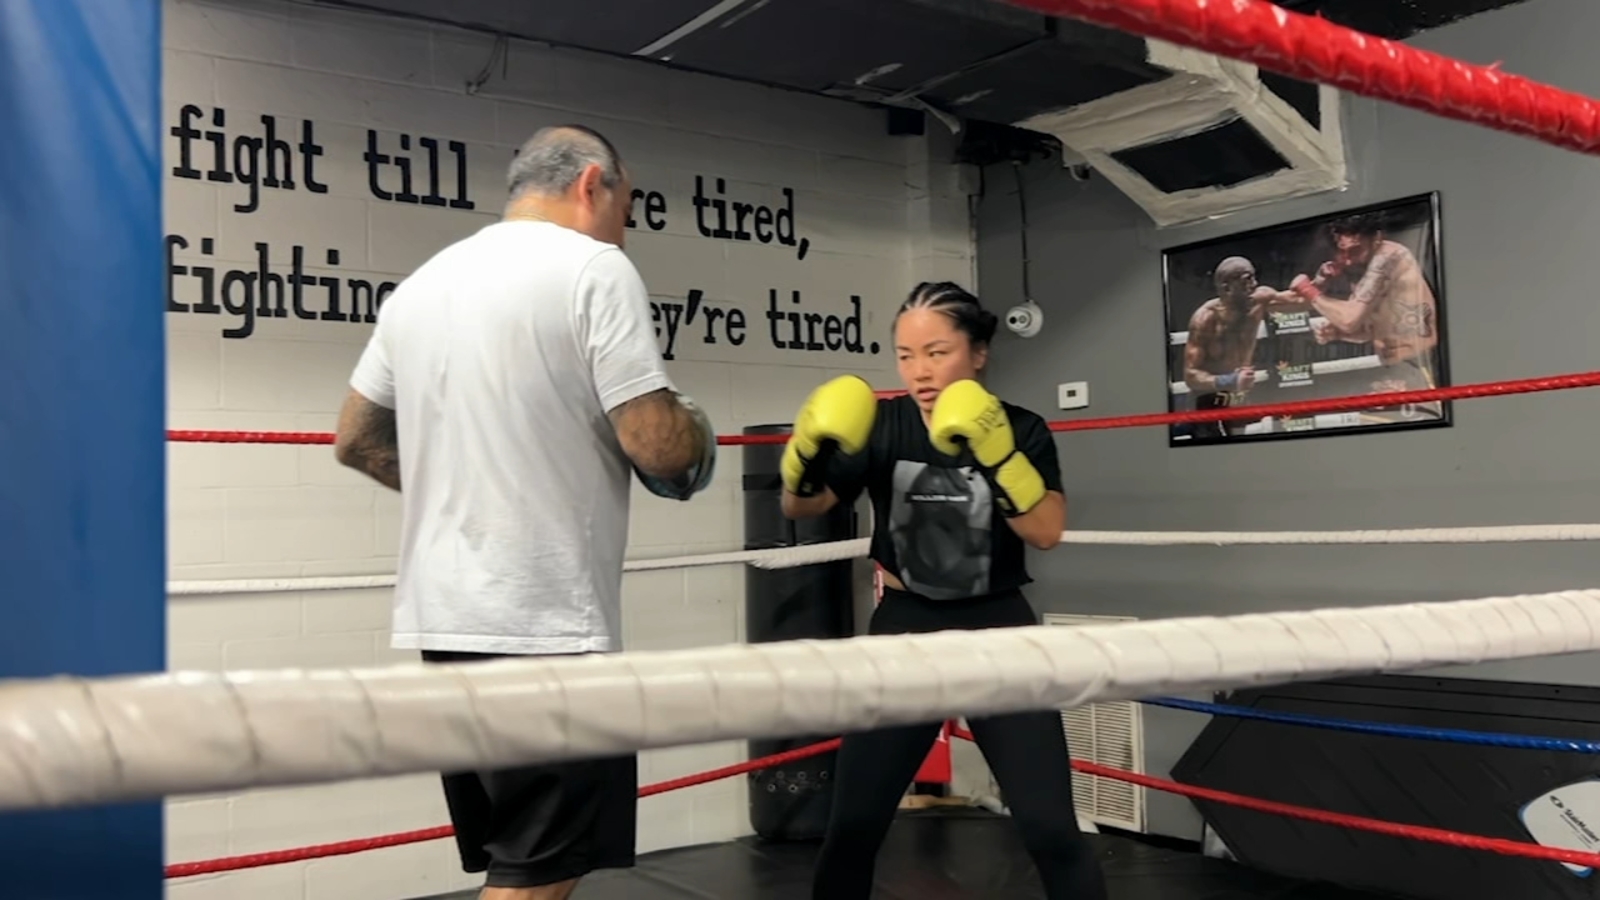 Domestic violence survivor Bi Nguyen to box in her hometown of Houston in Misfits event at NRG [Video]